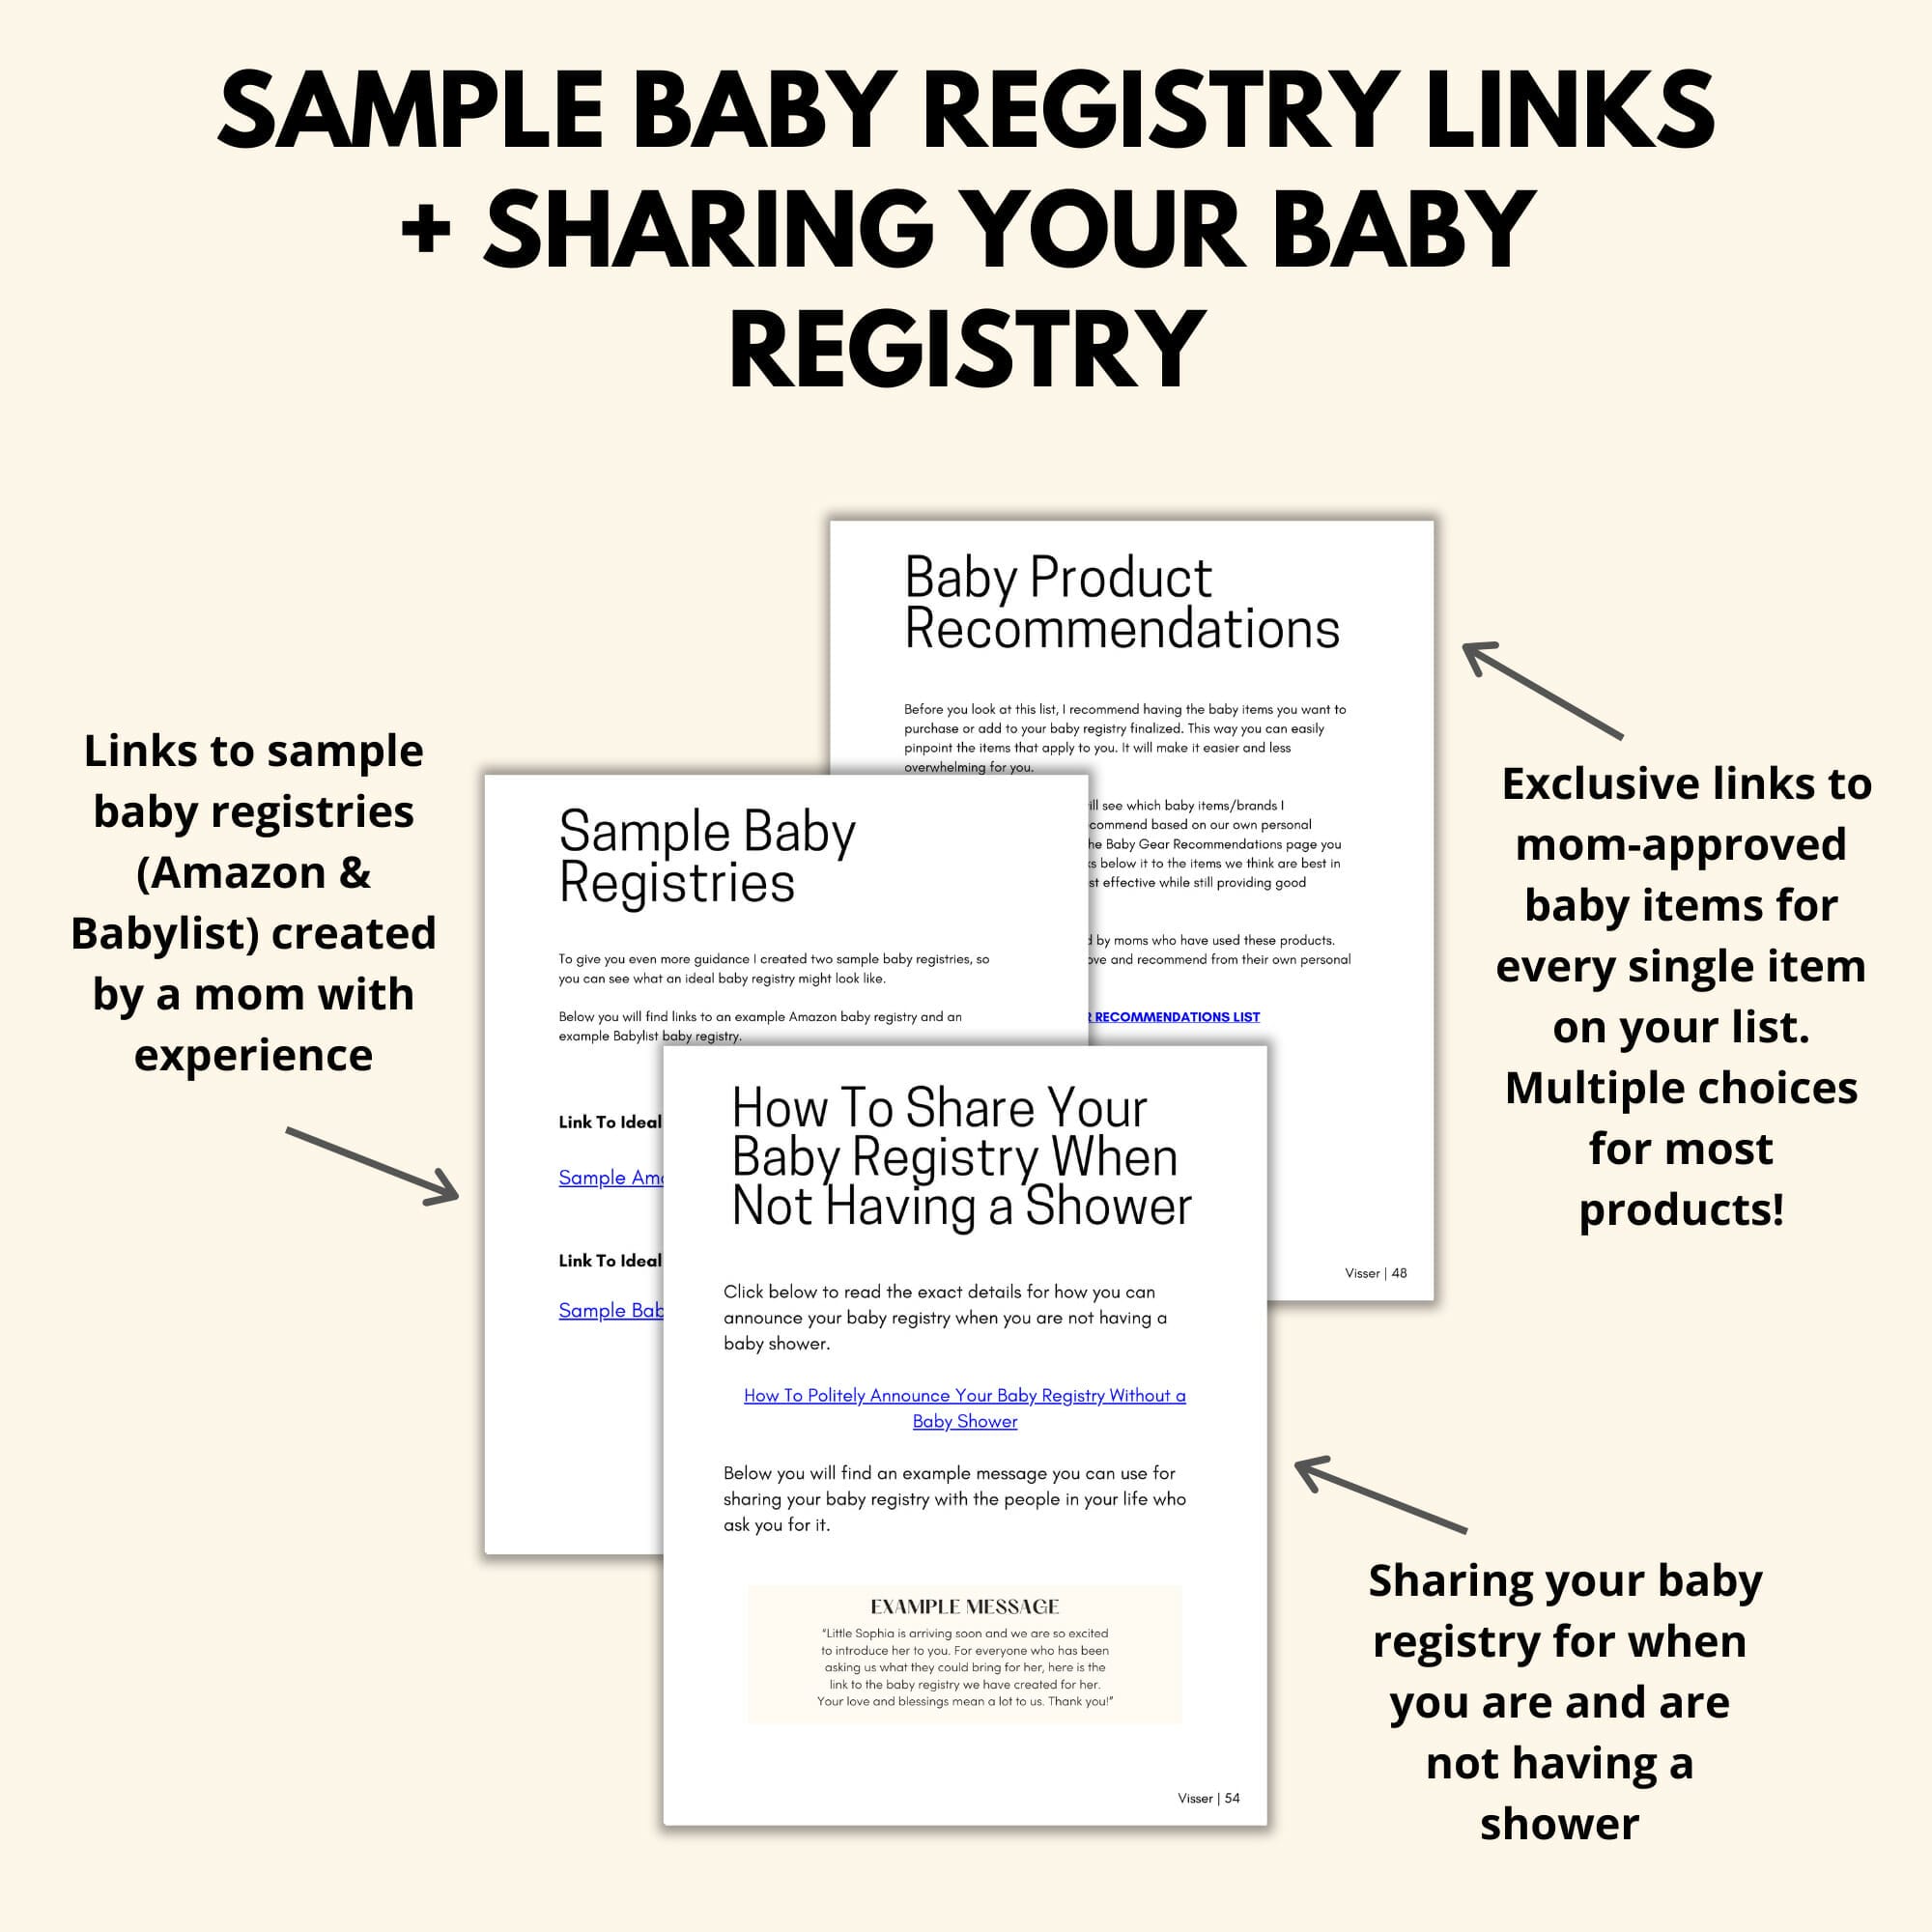 when do you need to make a baby registry